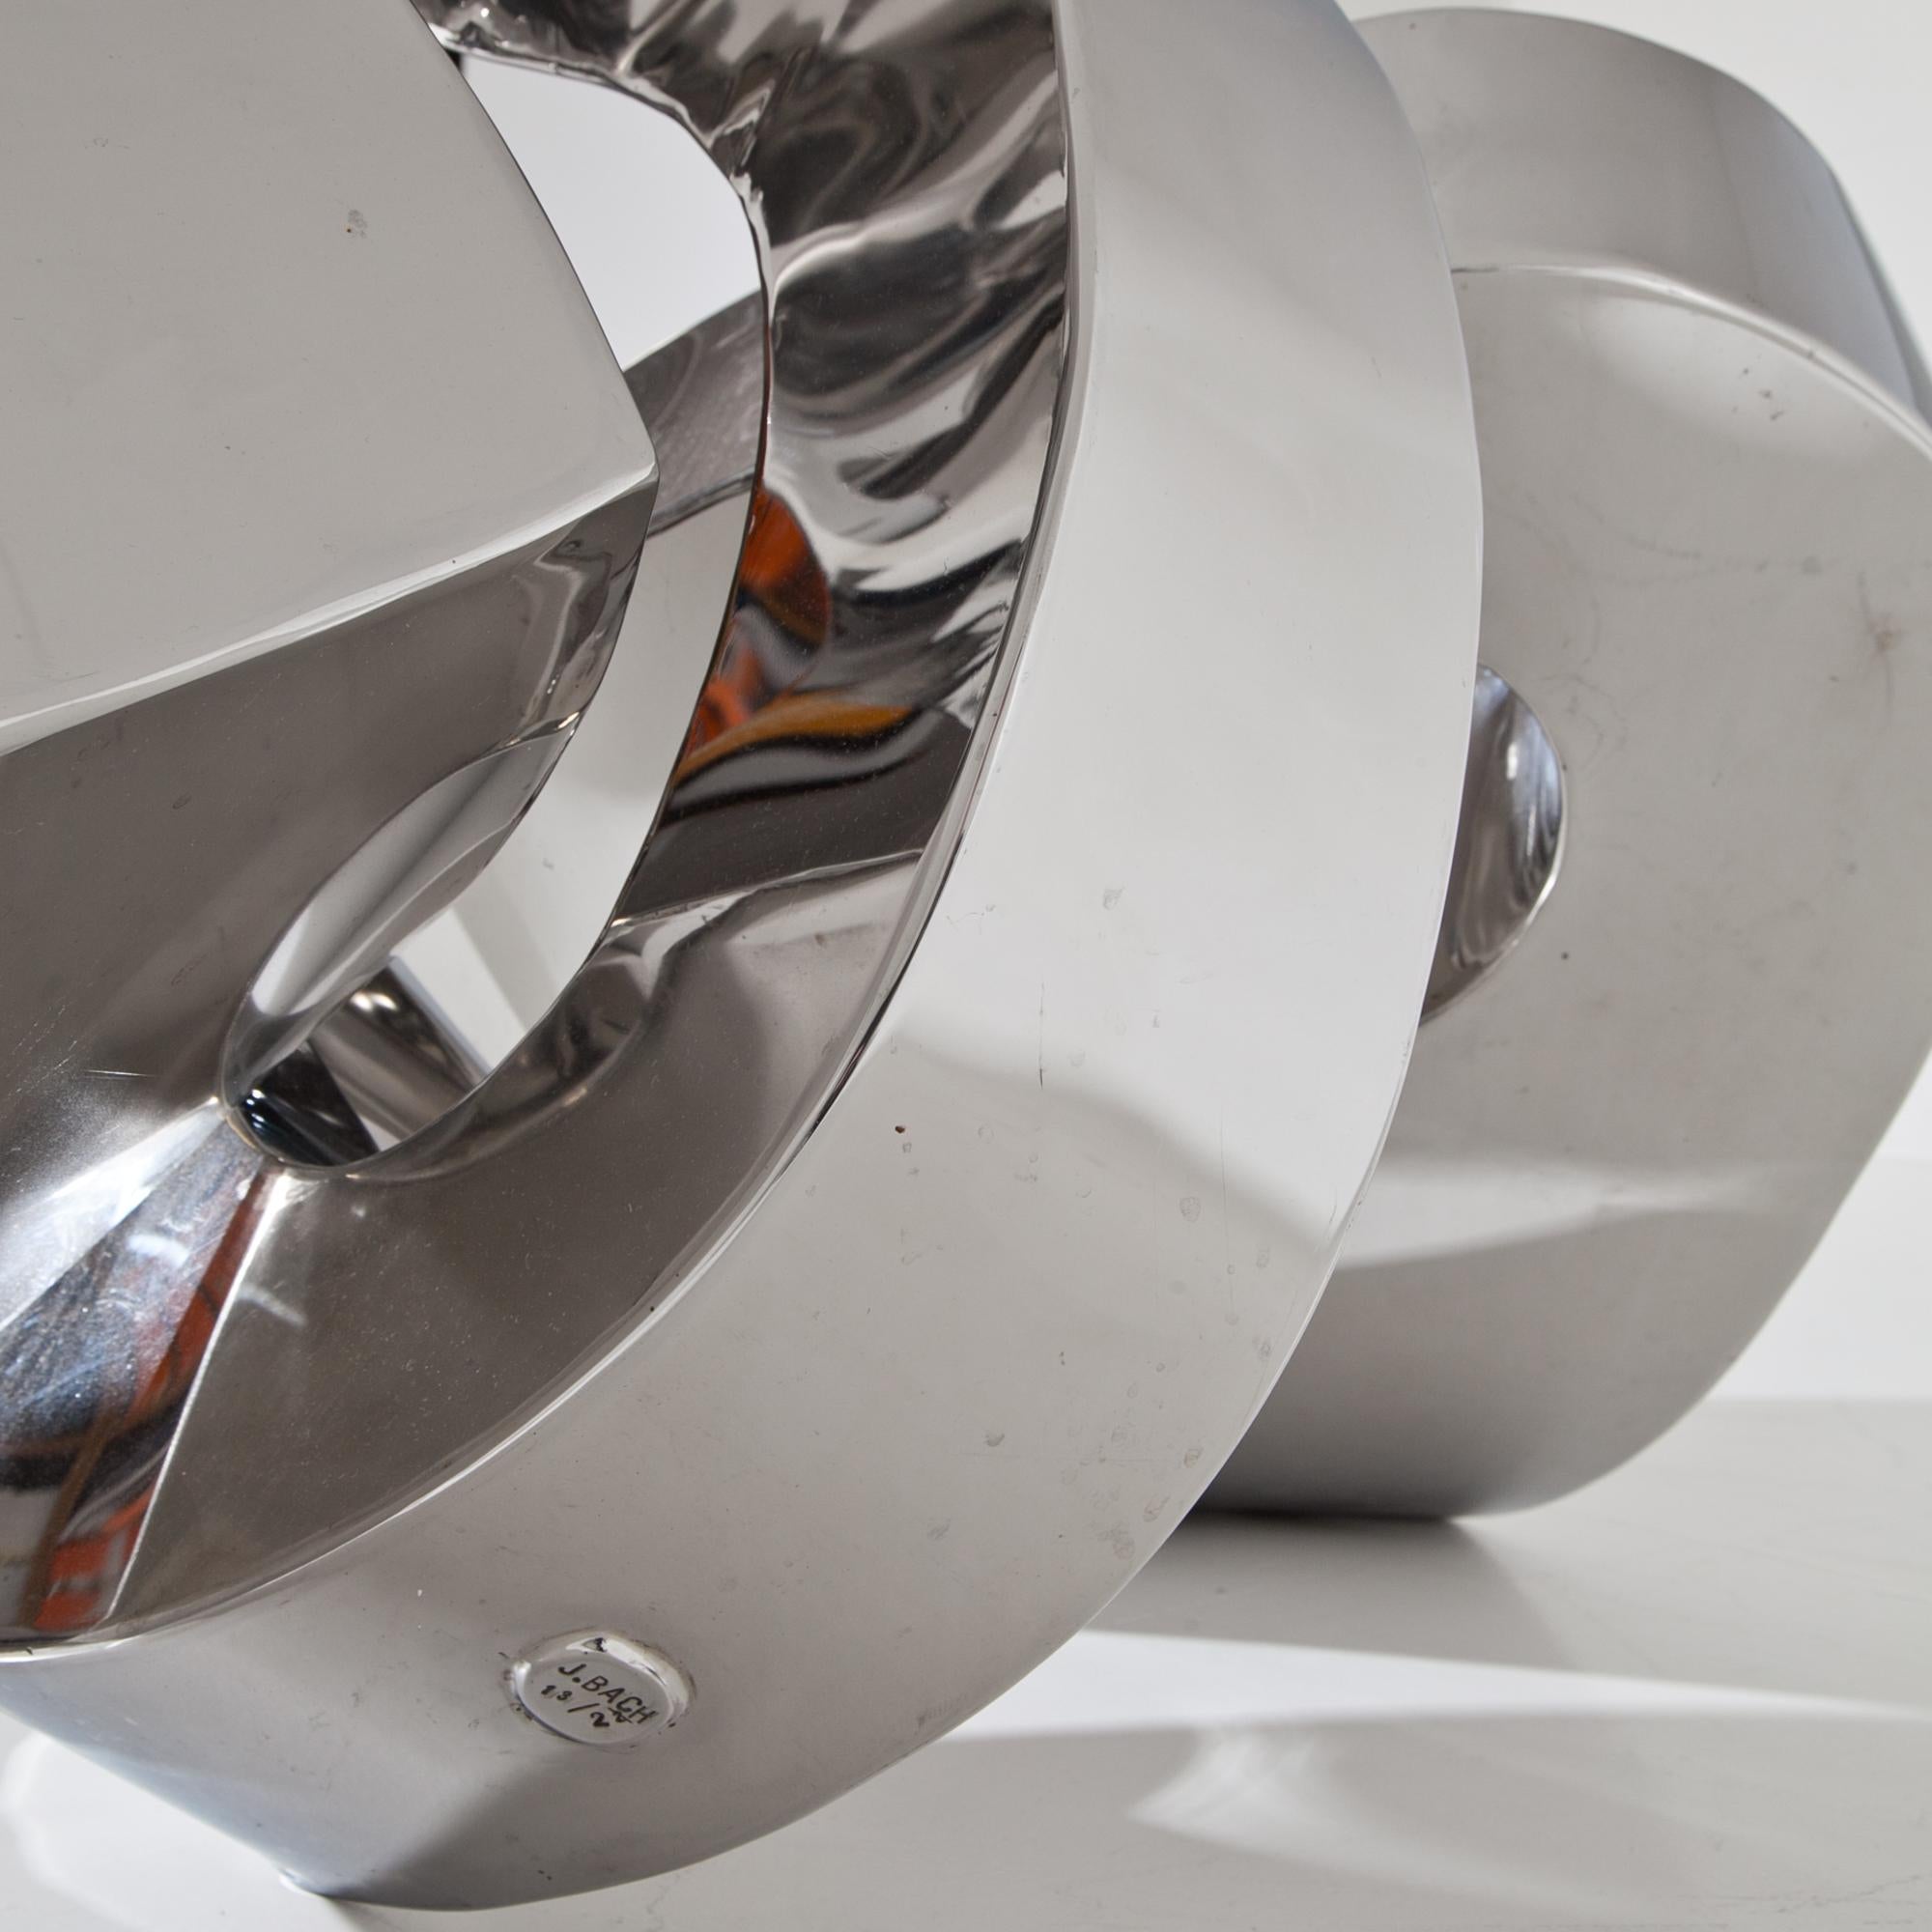 REFLEKTOR, Jörg Bach, 2013, polished Stainless Steel, Abstract Sculpture, Germany For Sale 7